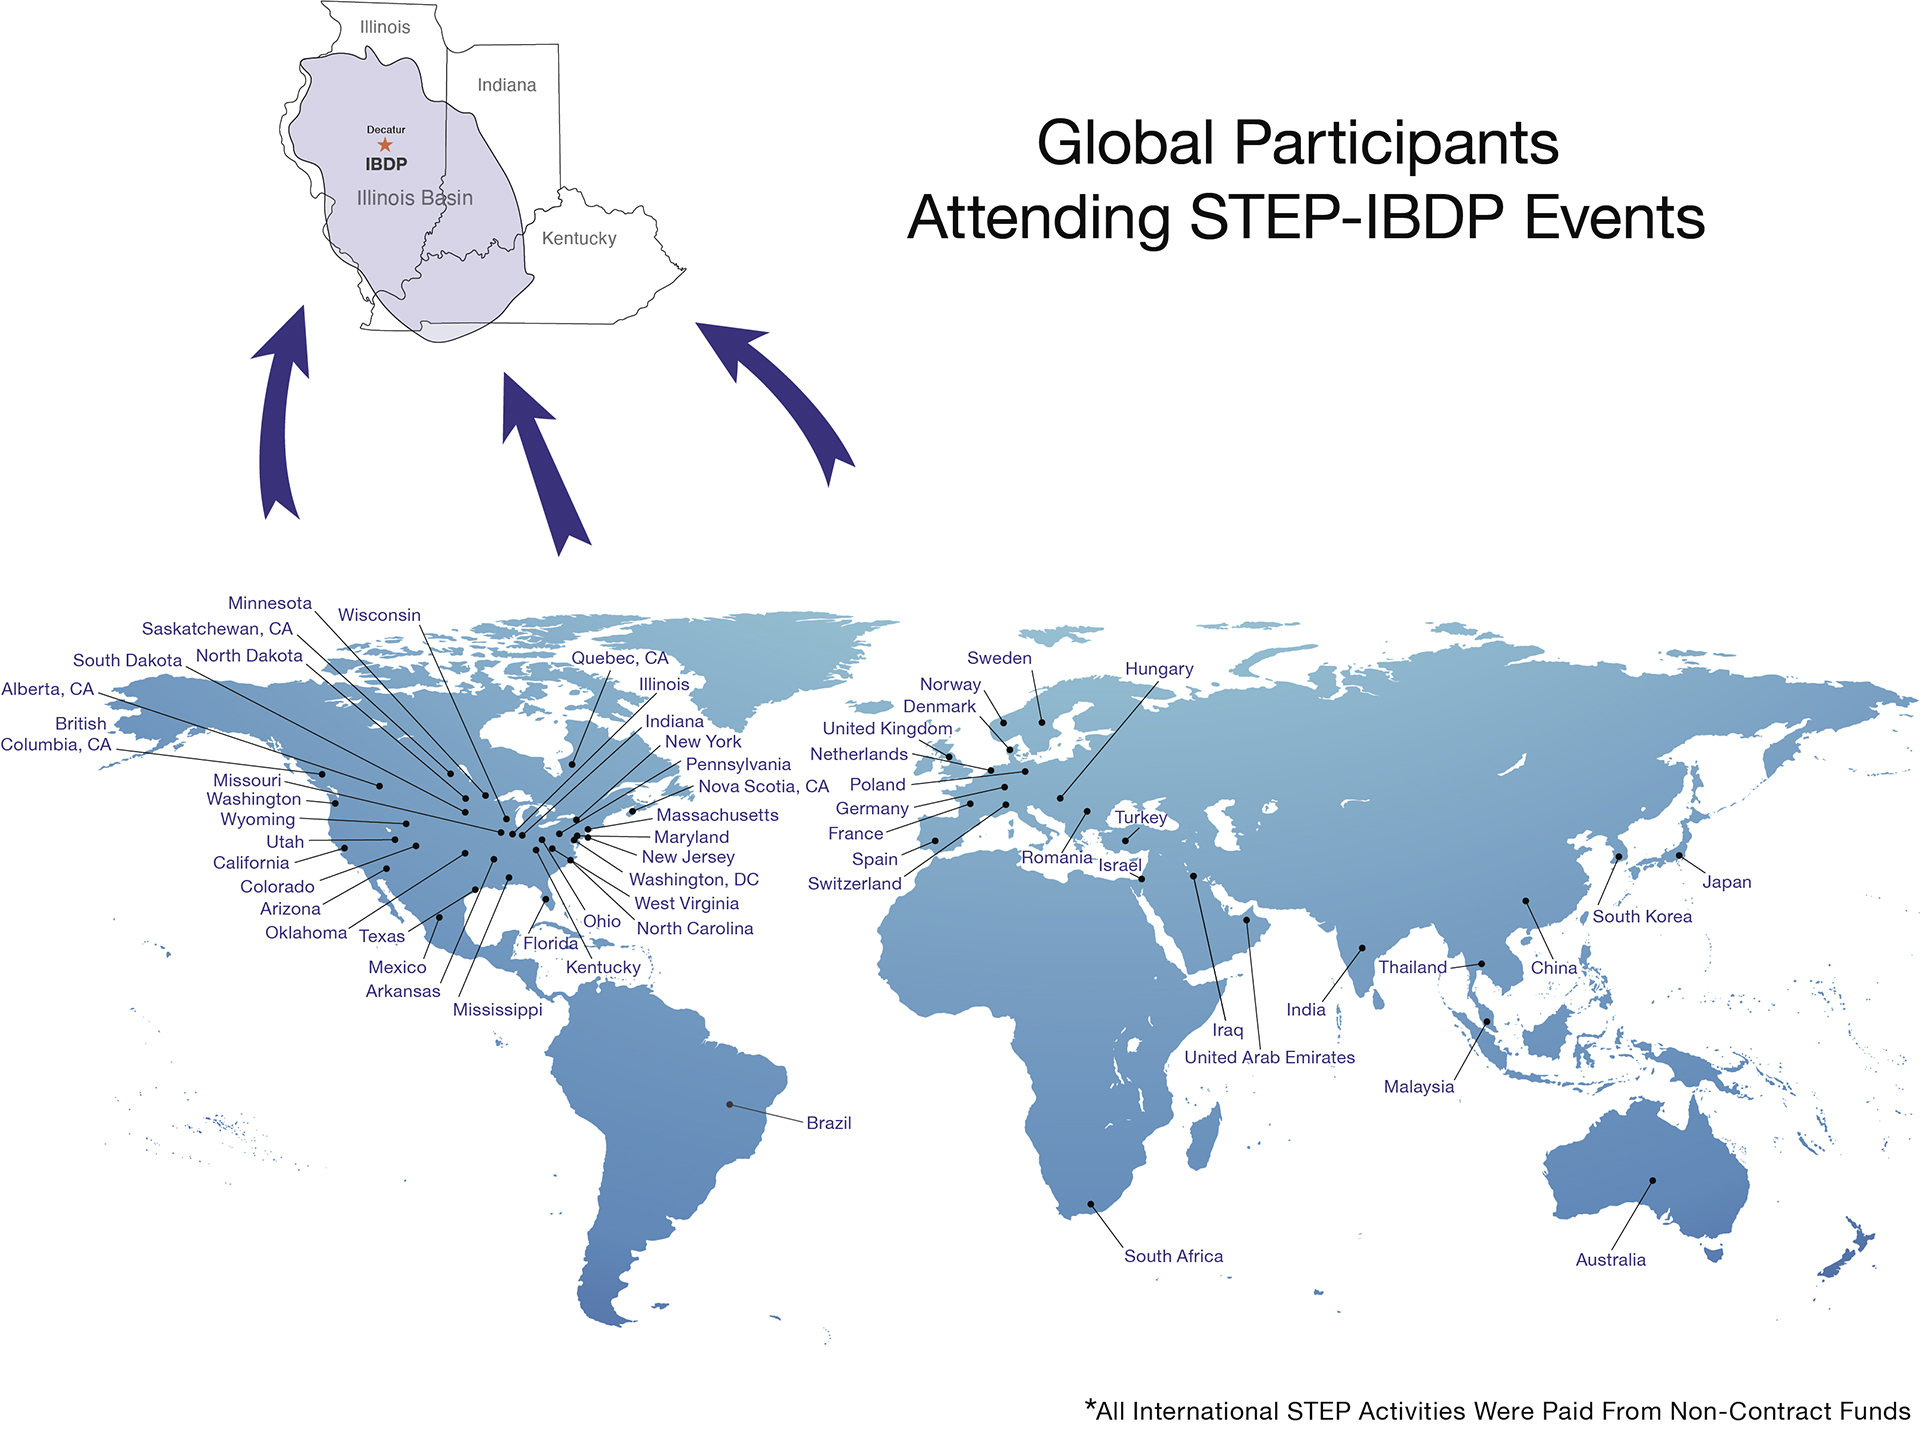 Global Participants Attending STEP-IBDP Events